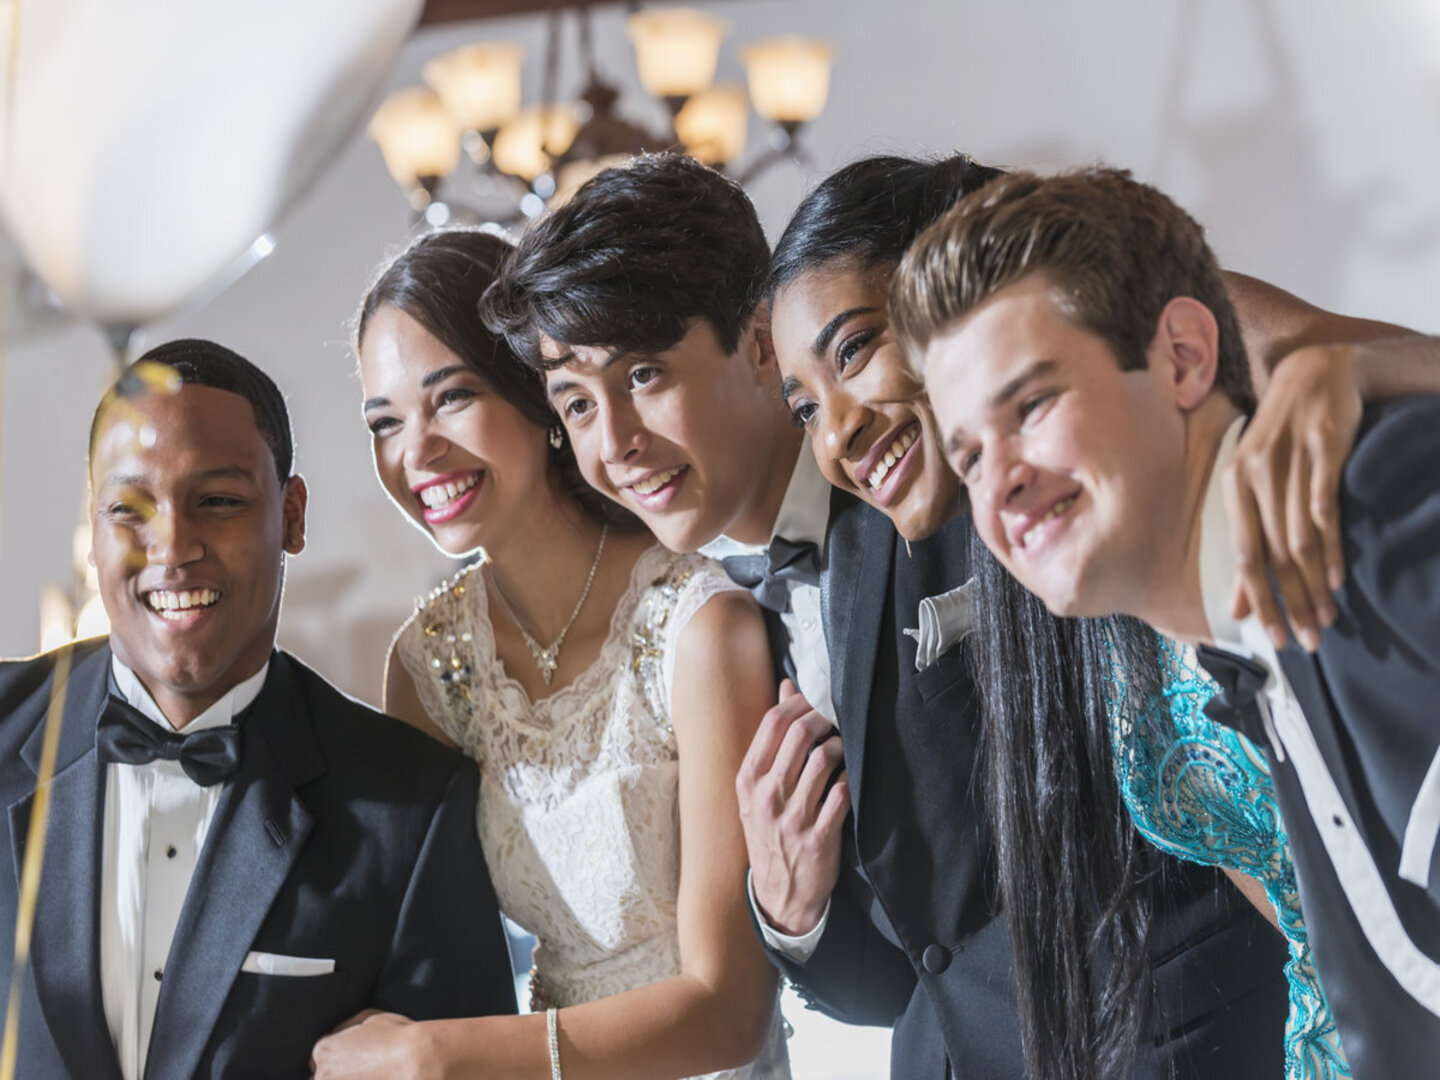 A group of five multi-ethnic teenagers and  young adults dressed in formalwear - dresses and tuxedos. They are at a special event, a prom or party at a restaurant.